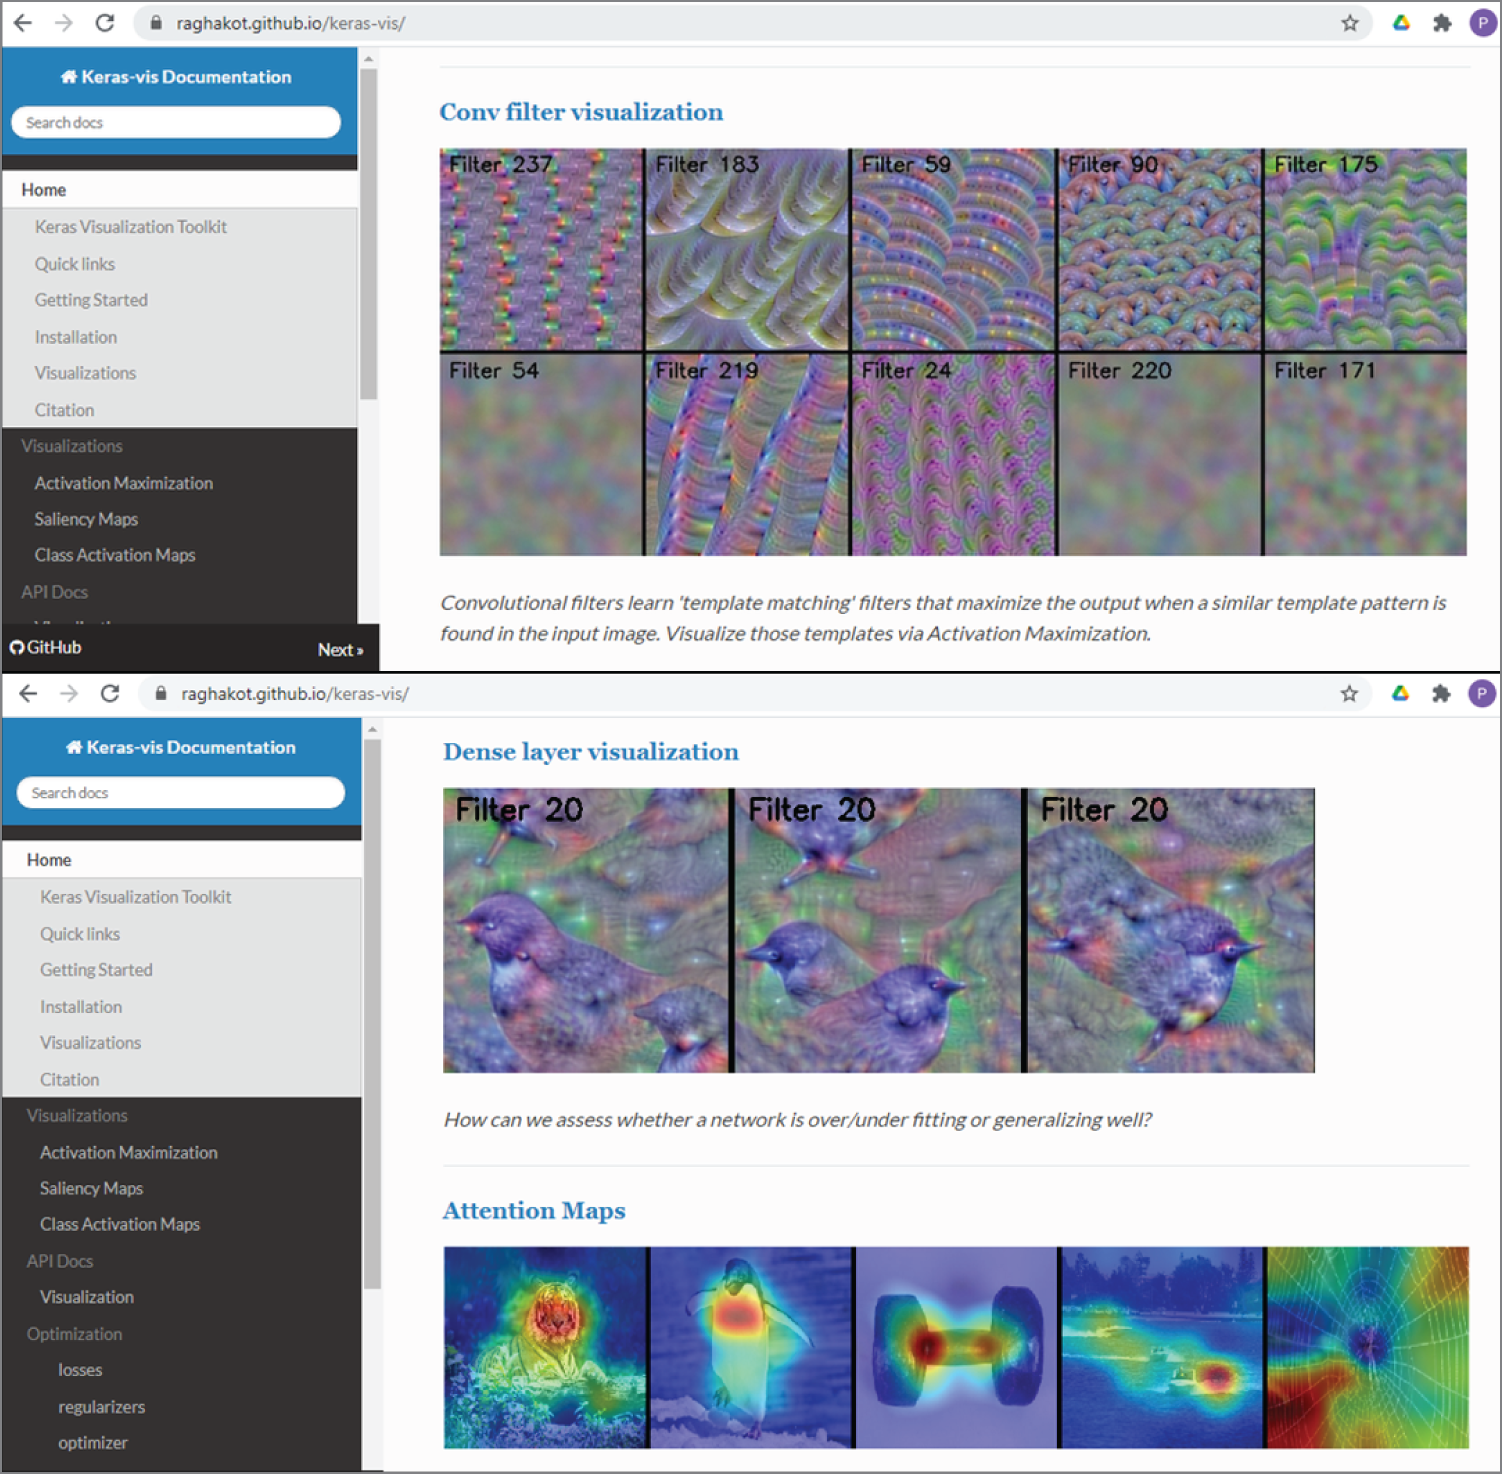 Snapshot of the convolutional filter visualization (top), the dense layer visualization, and the attention maps (bottom) in the Keras Visualization Toolkit.